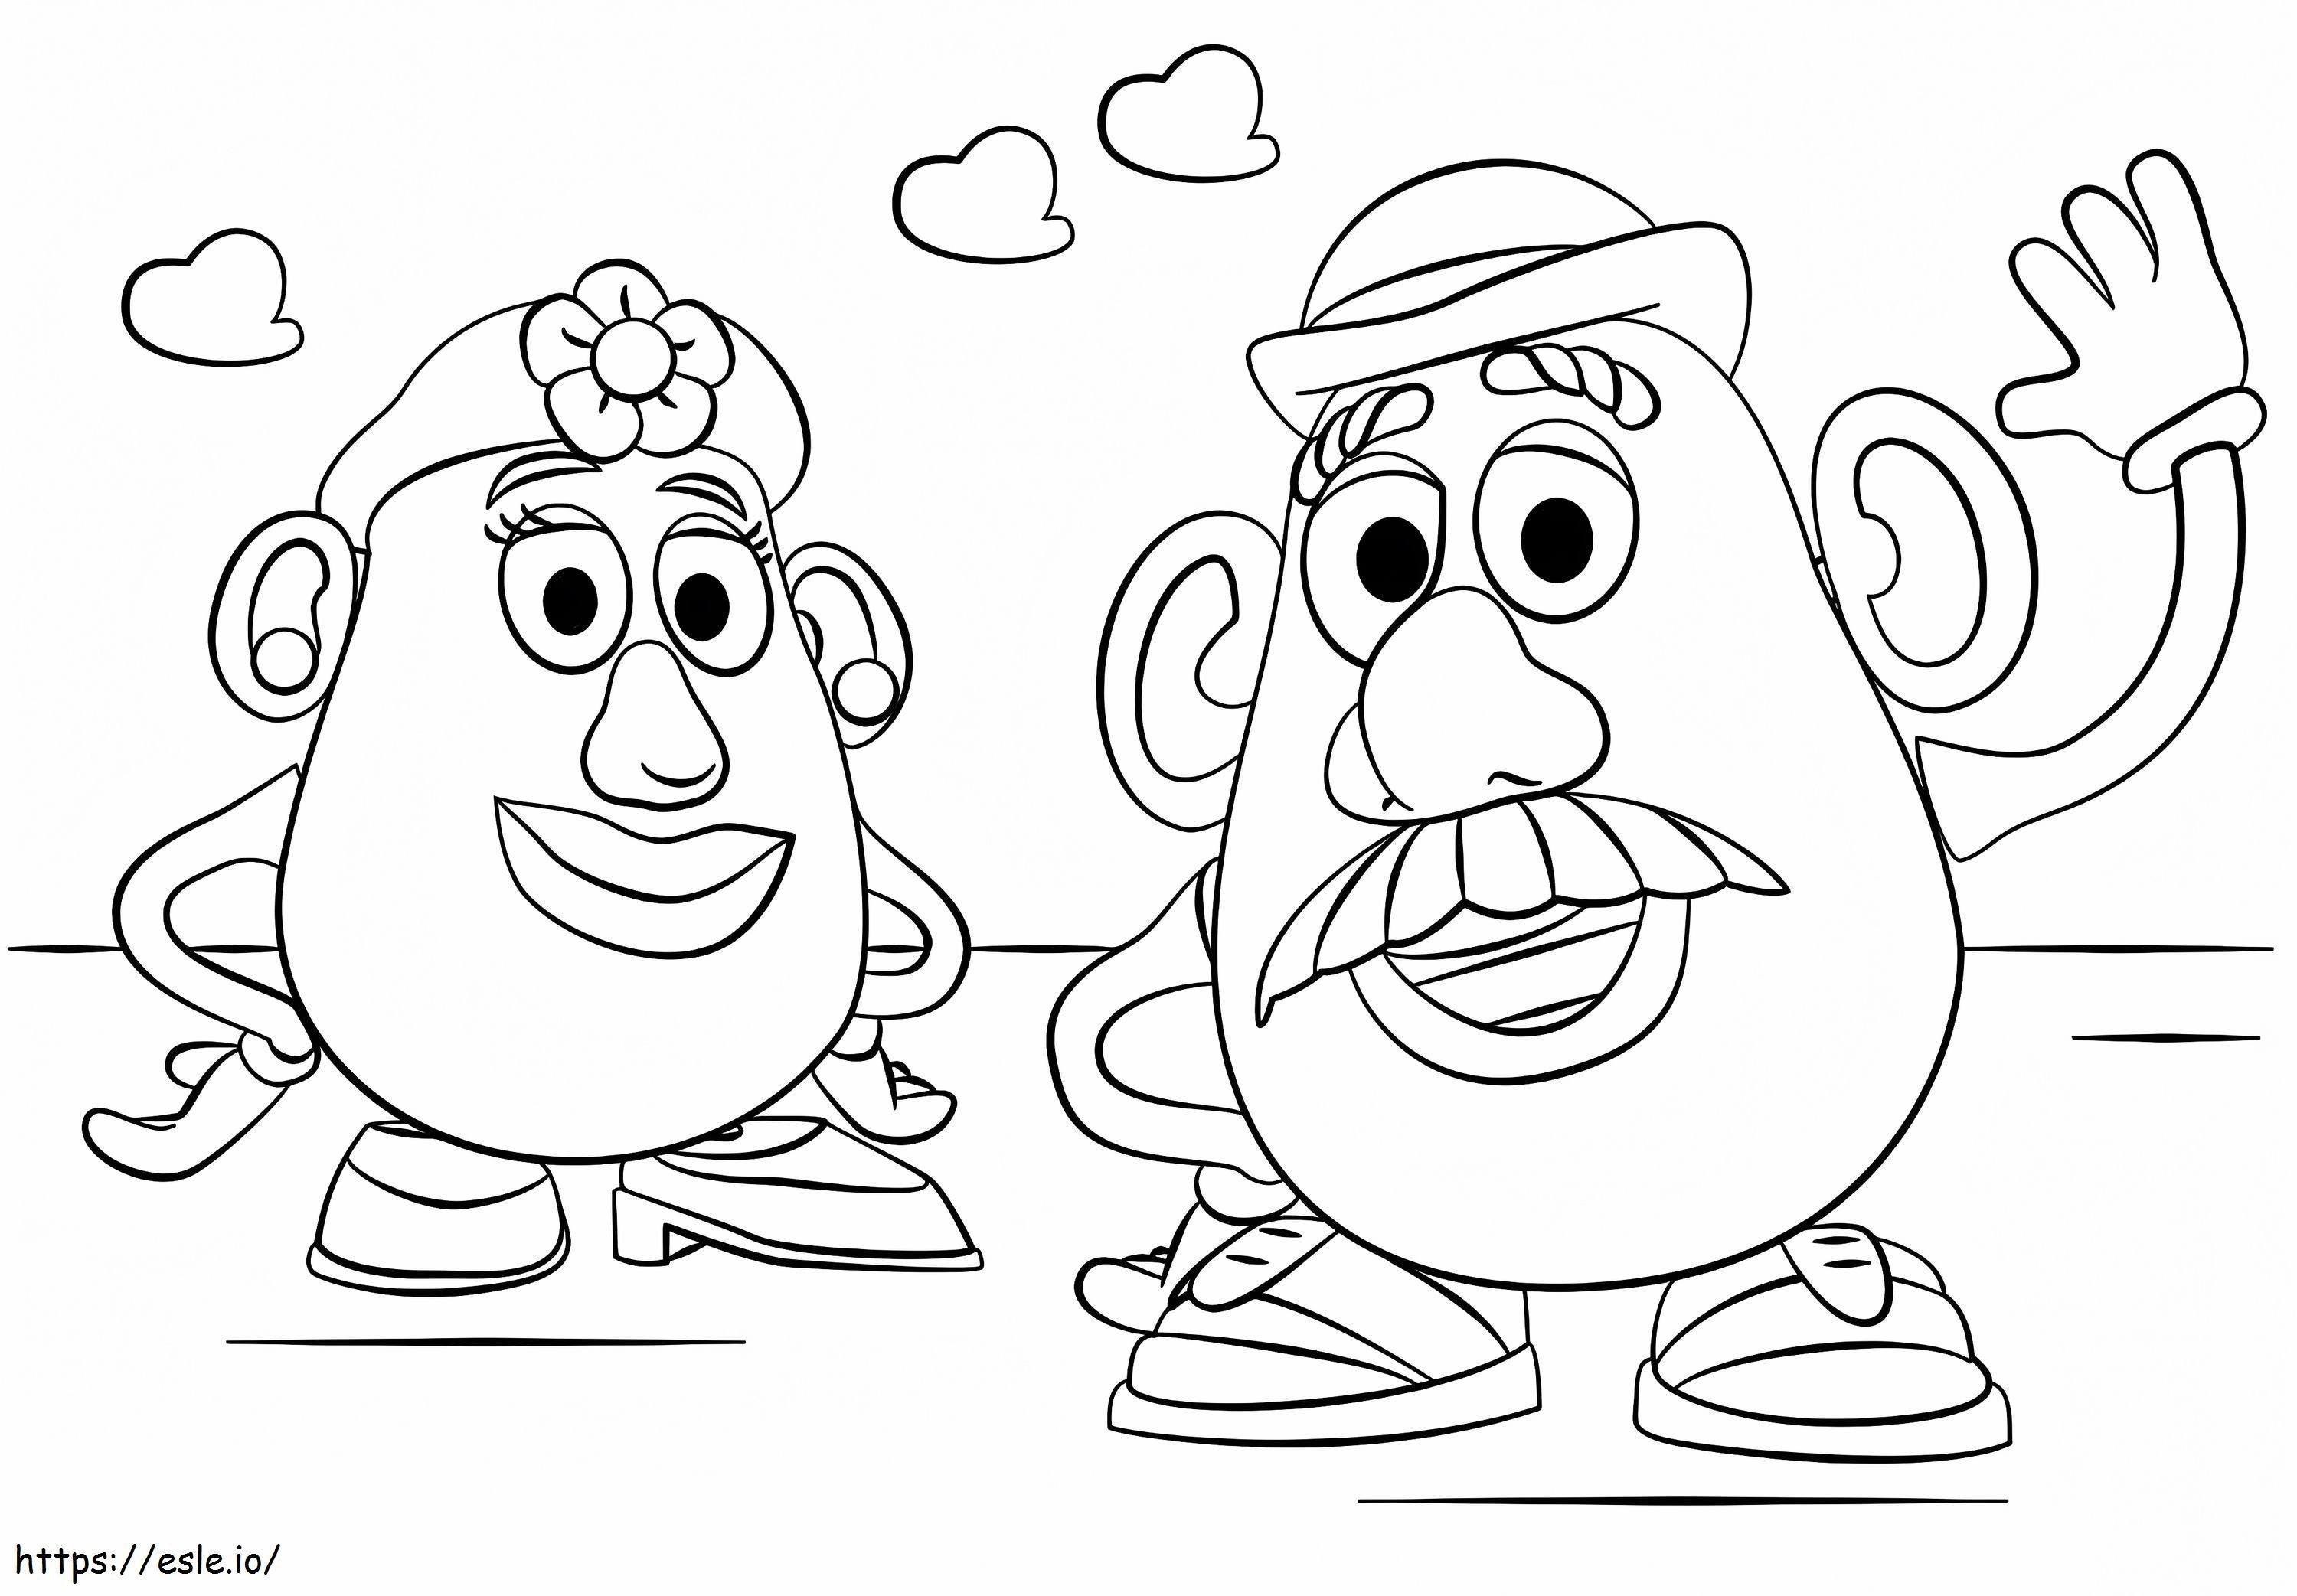 Mr. And Mrs. Potato Head coloring page